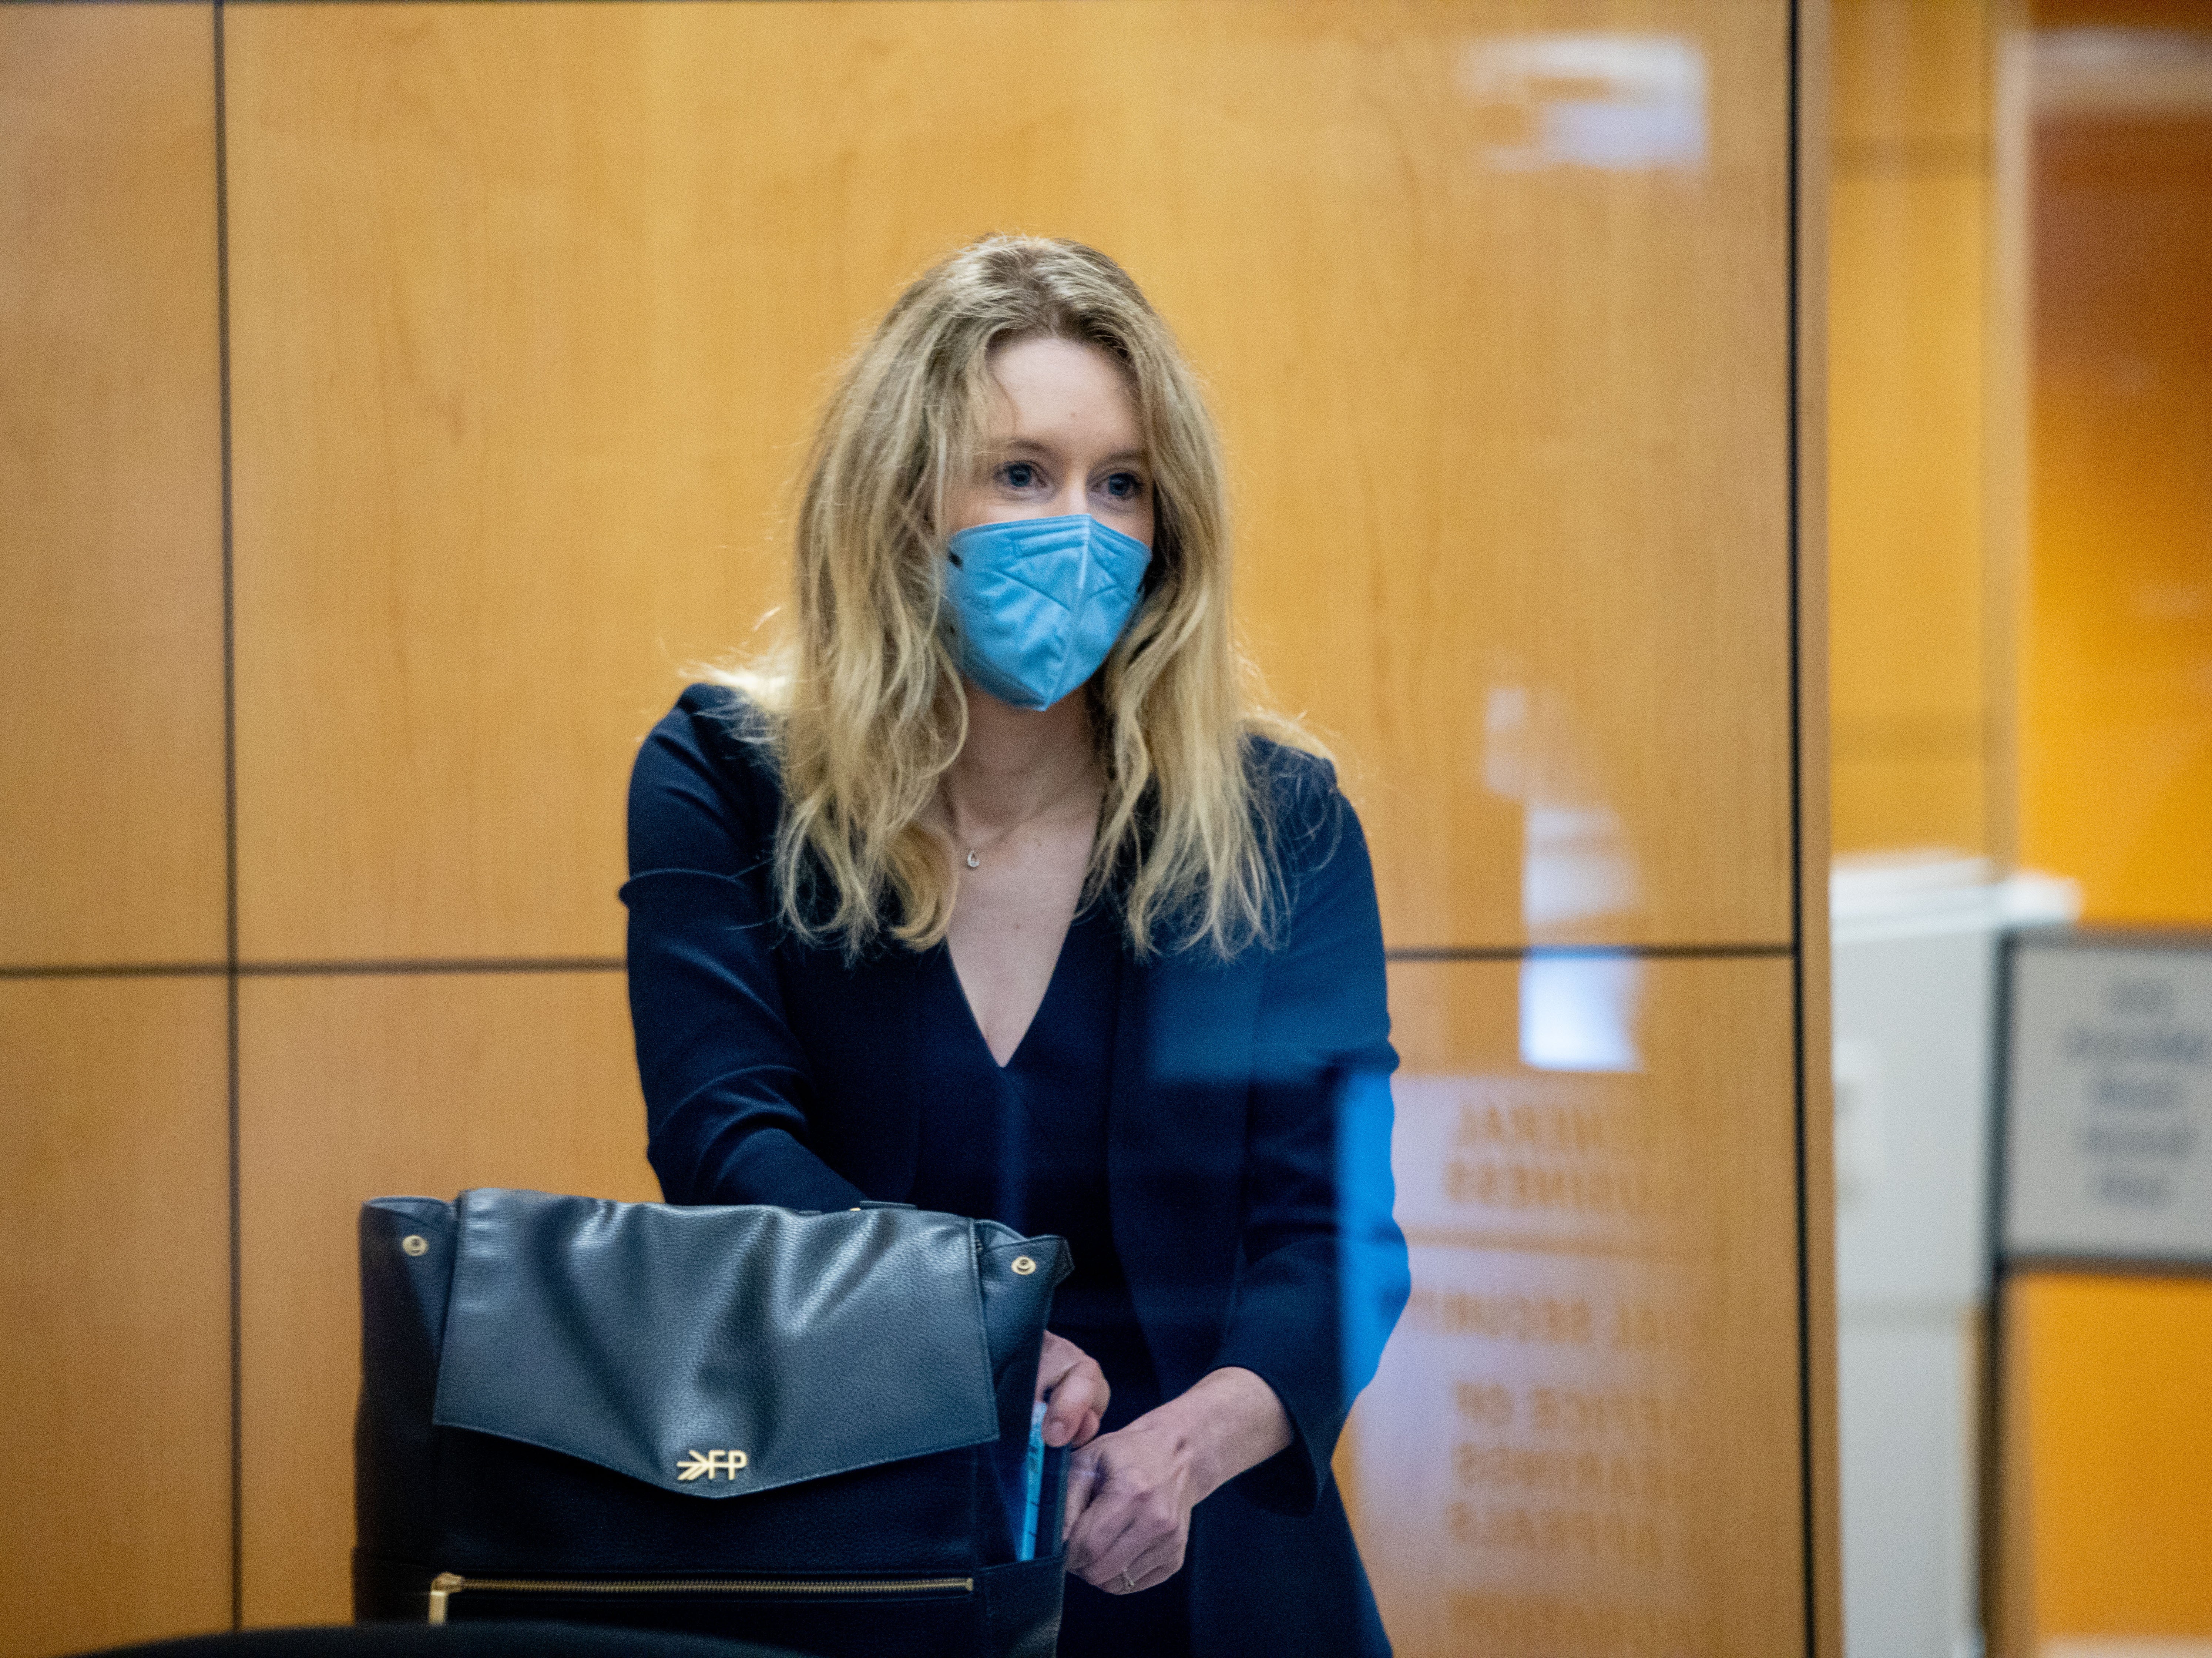 Theranos founder Elizabeth Holmes collects her belongings after going through security at the Robert F. Peckham Federal Building with her defense team on August 31, 2021 in San Jose, California